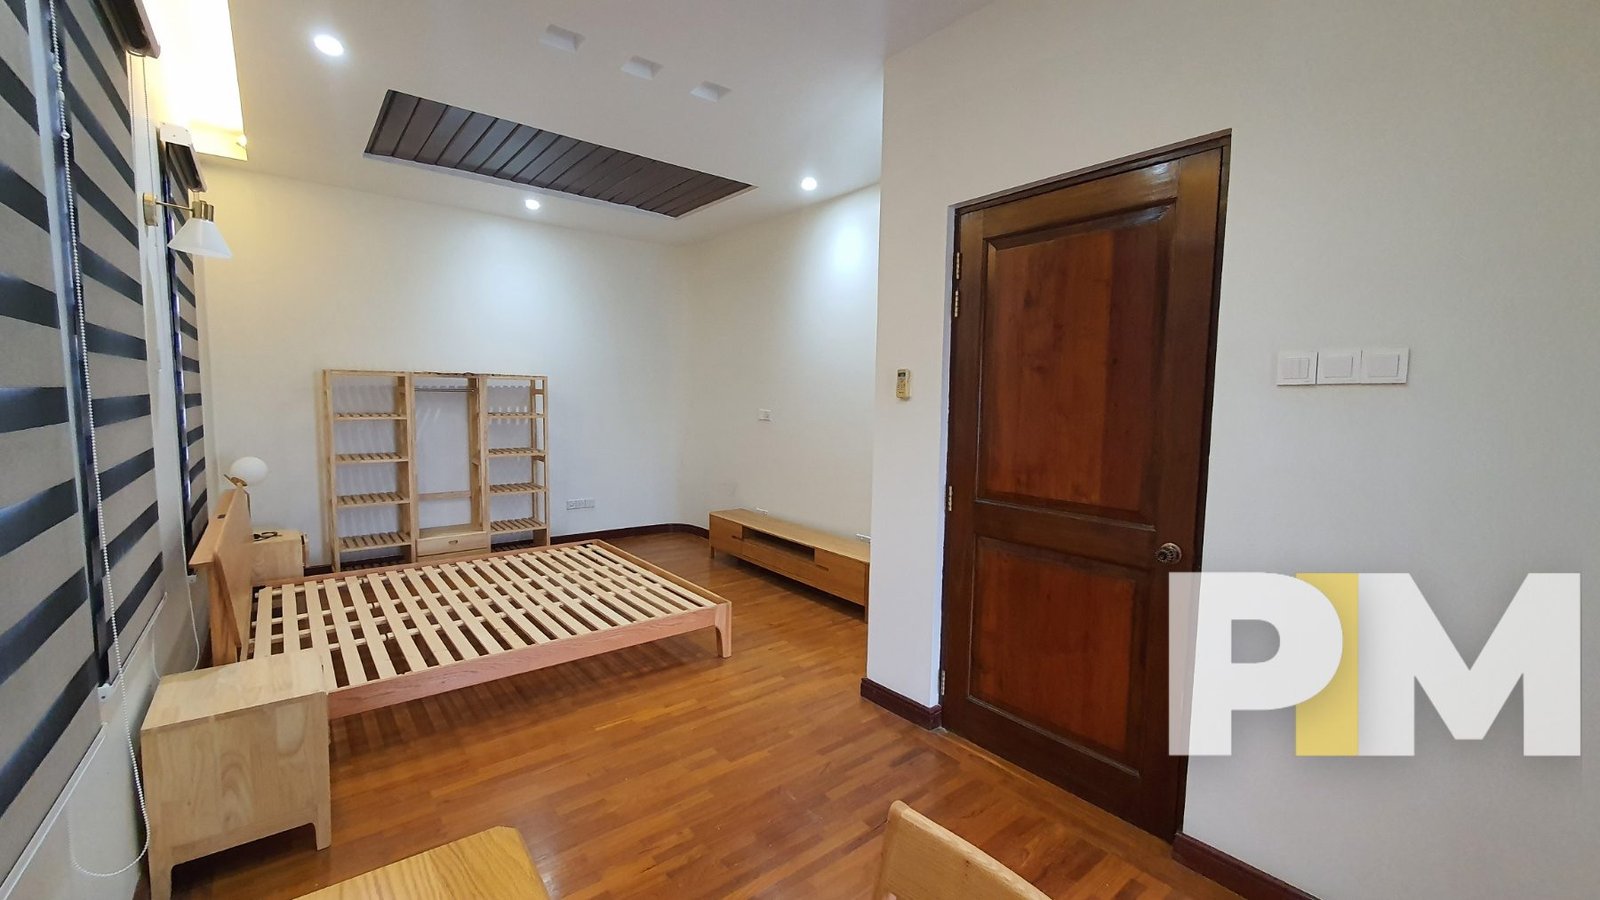 bedroom with bed - House for rent in Golden Valley